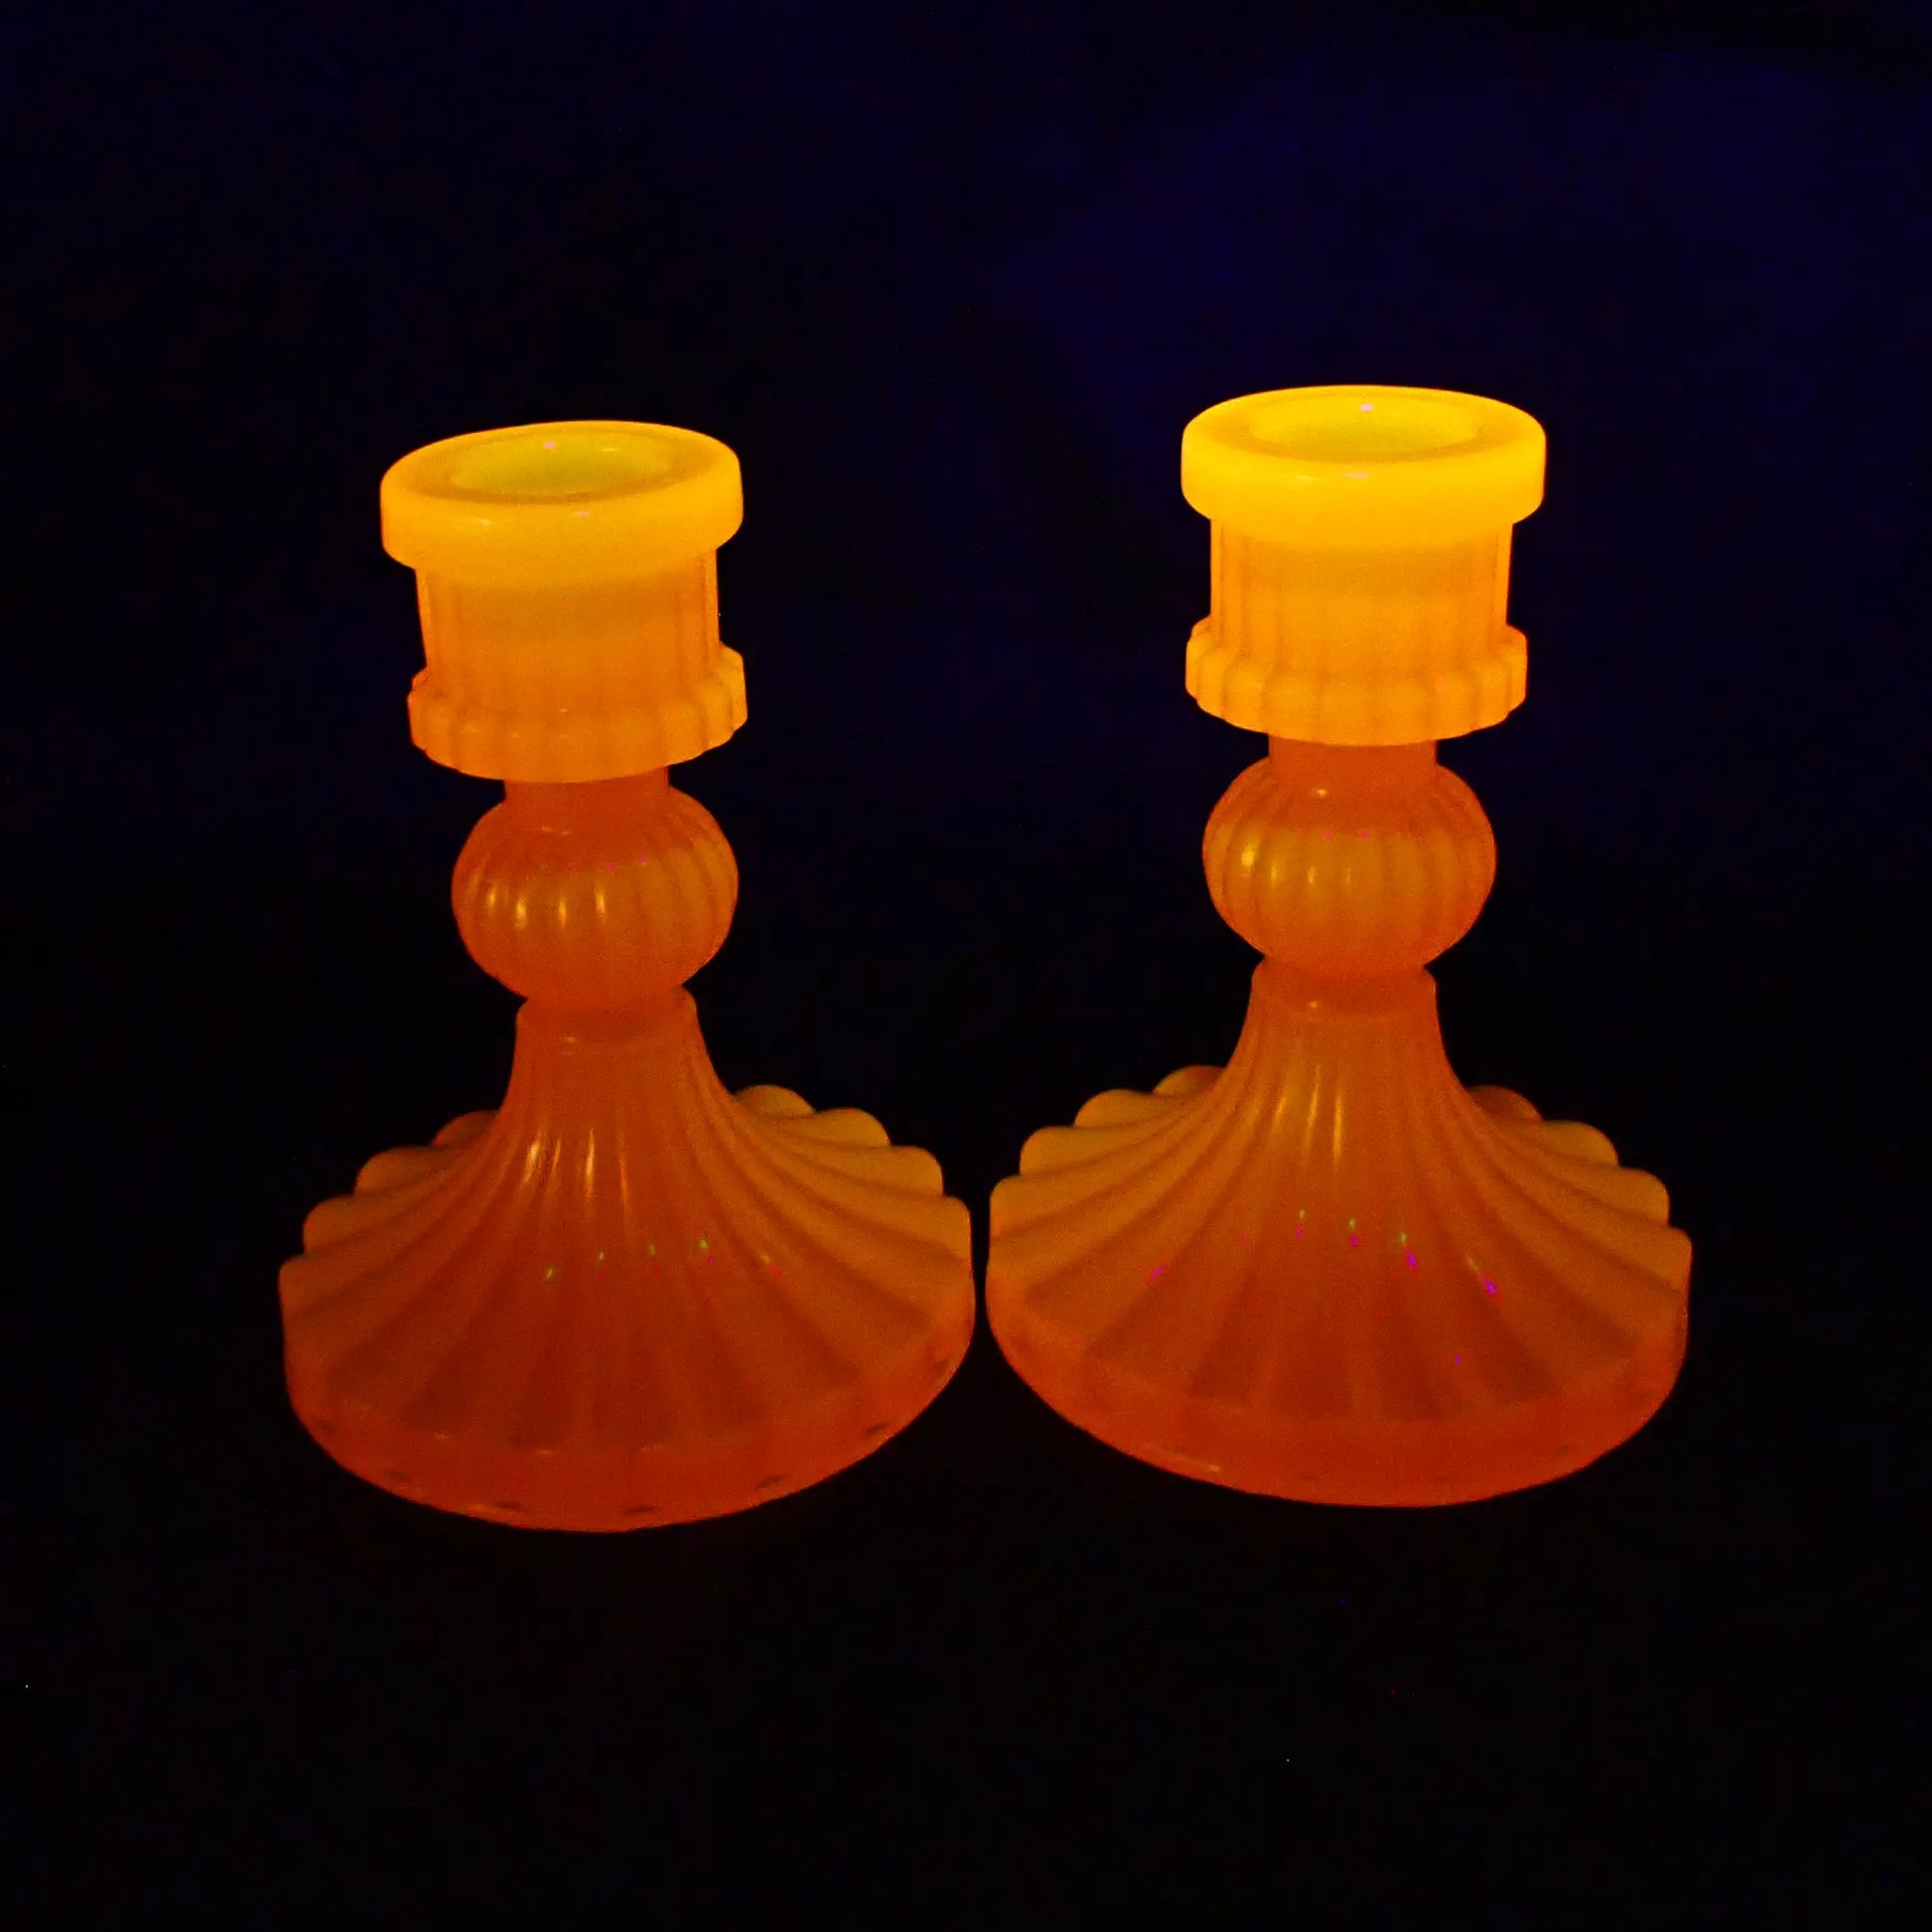 Photo showing how the vintage style handmade resin neon orange candlestick holders fluoresce under a UV light.